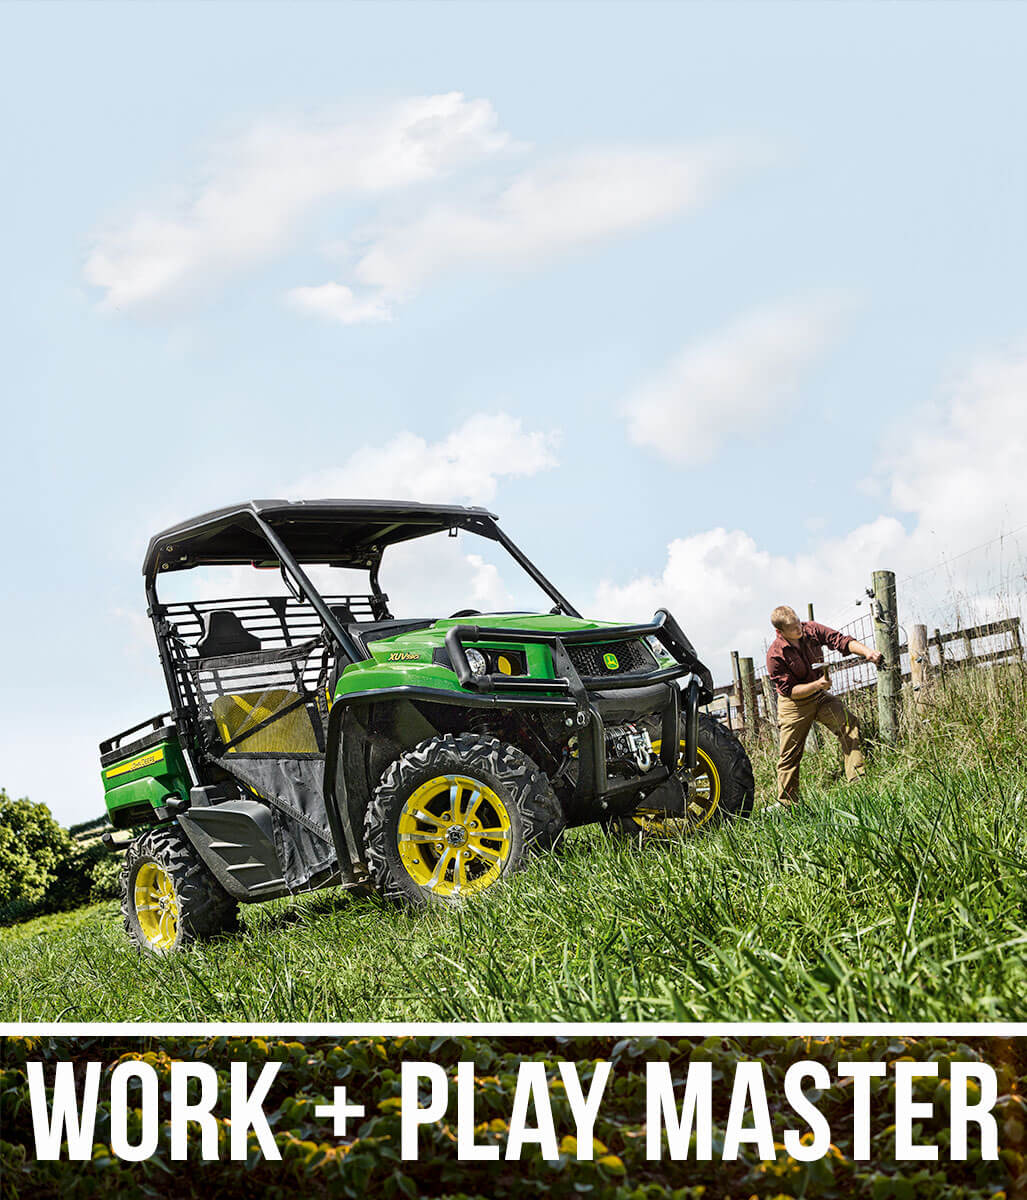 The Work + Play Master Gator Package